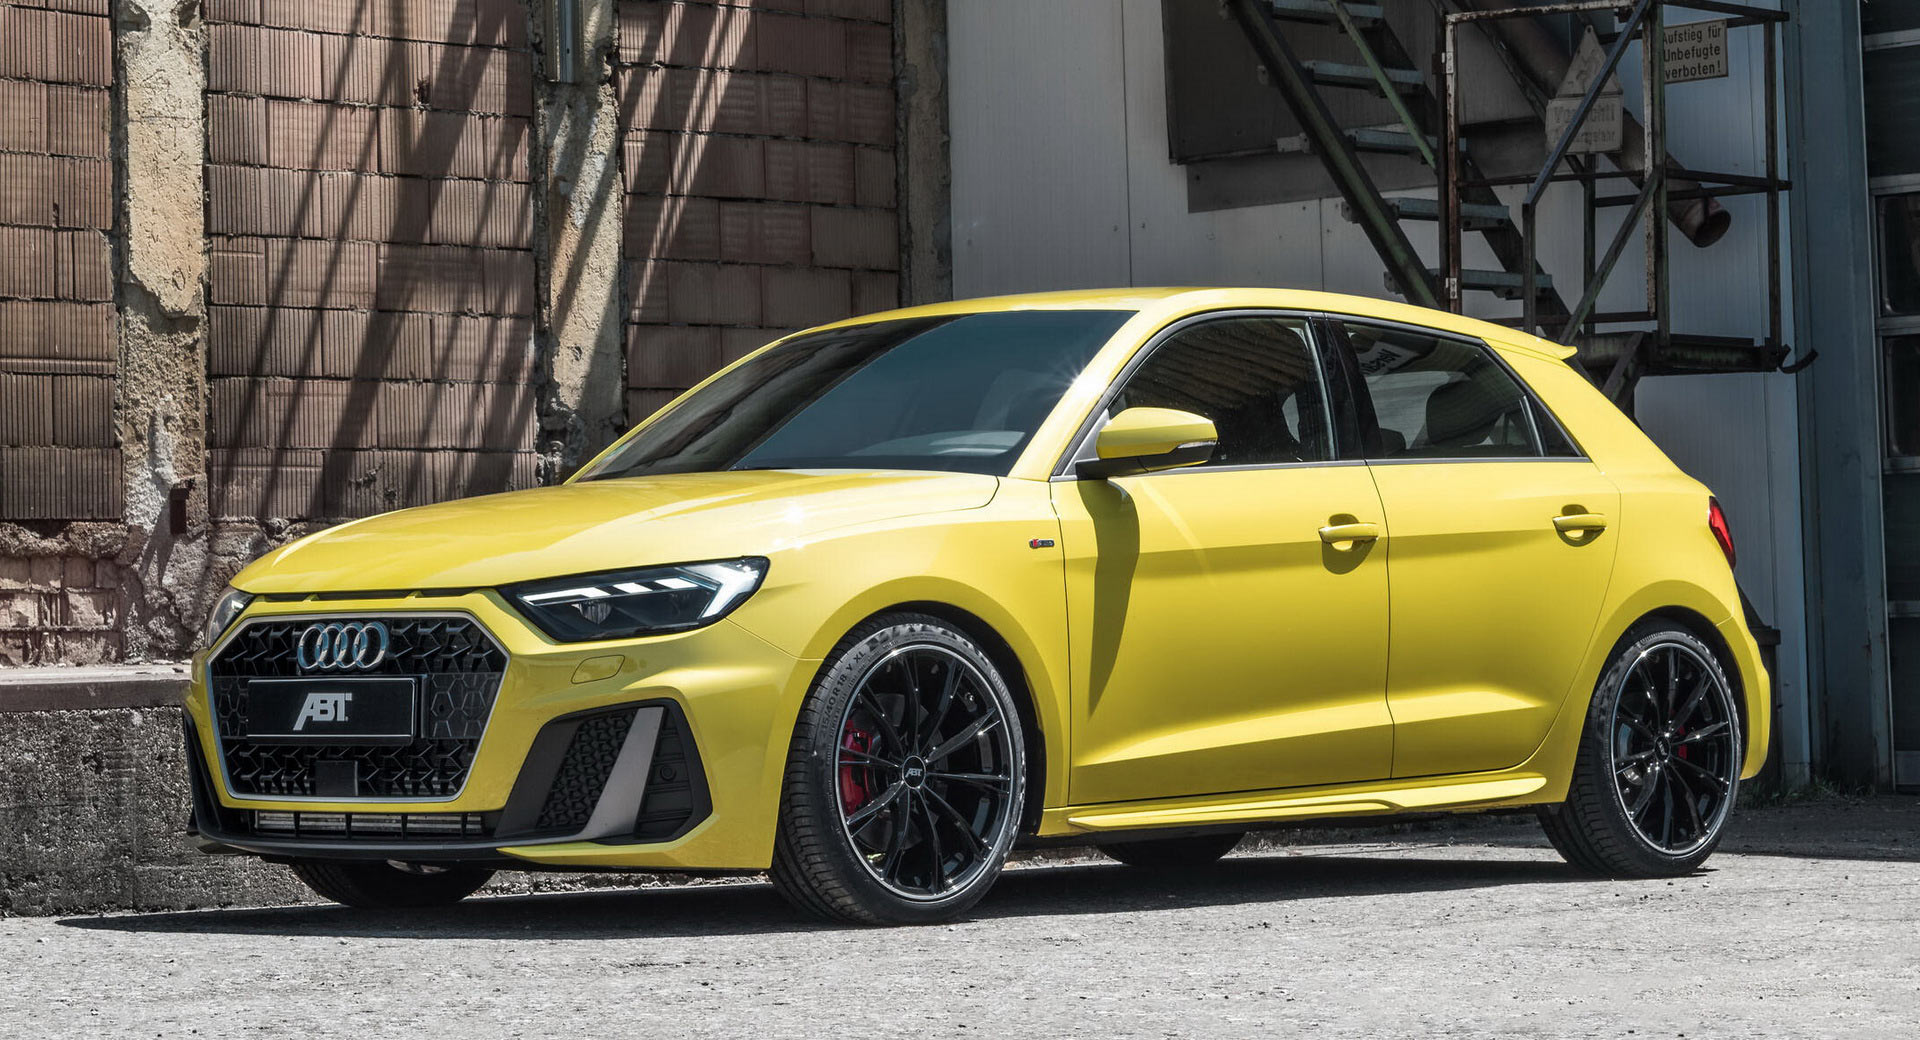 https://www.carscoops.com/wp-content/uploads/2019/08/a3f3cef2-abt-audi-a1-tuning-11.jpg